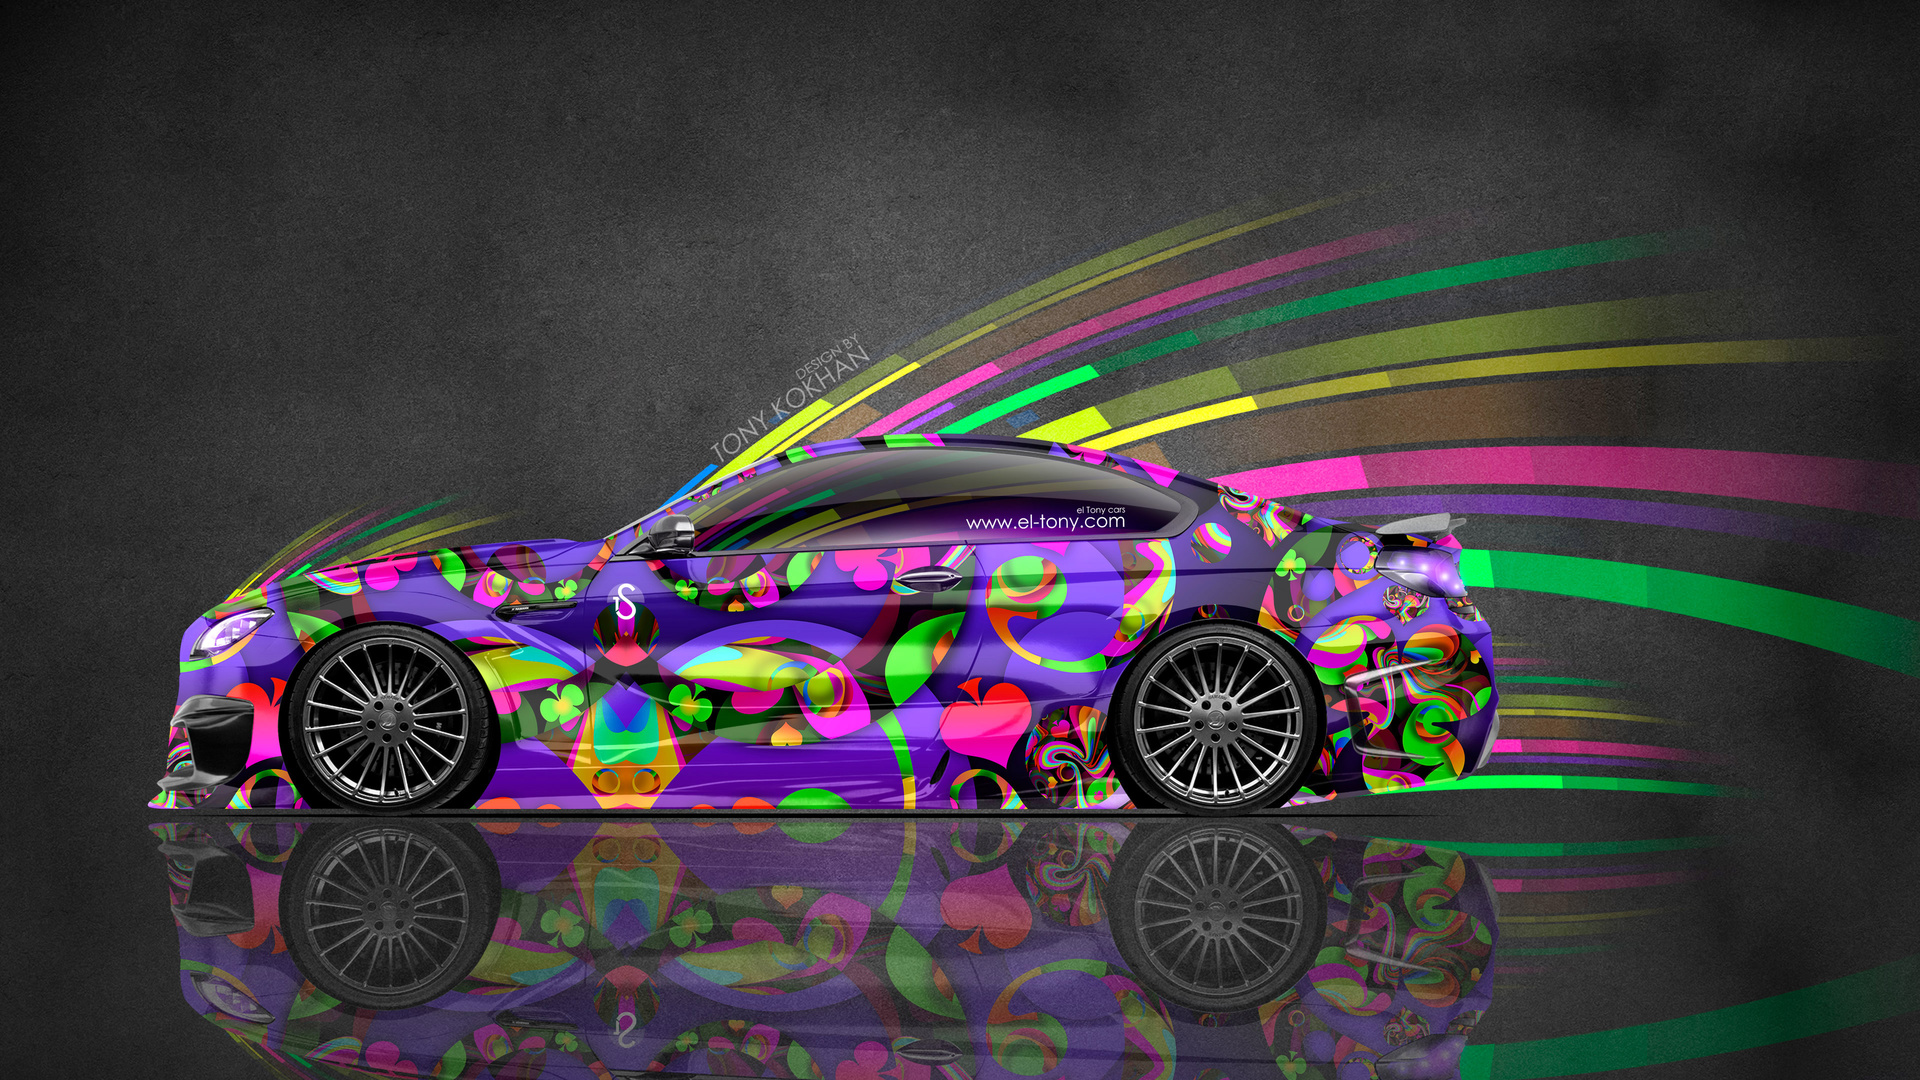 tony kokhan, bmw, m6, hamann, tuning, side, super, abstract, aerography, multicolors, effects, speed, vinyl, 4k, wallpapers, el tony cars, design, art, style, photoshop,  , , , , 6,  , , , 